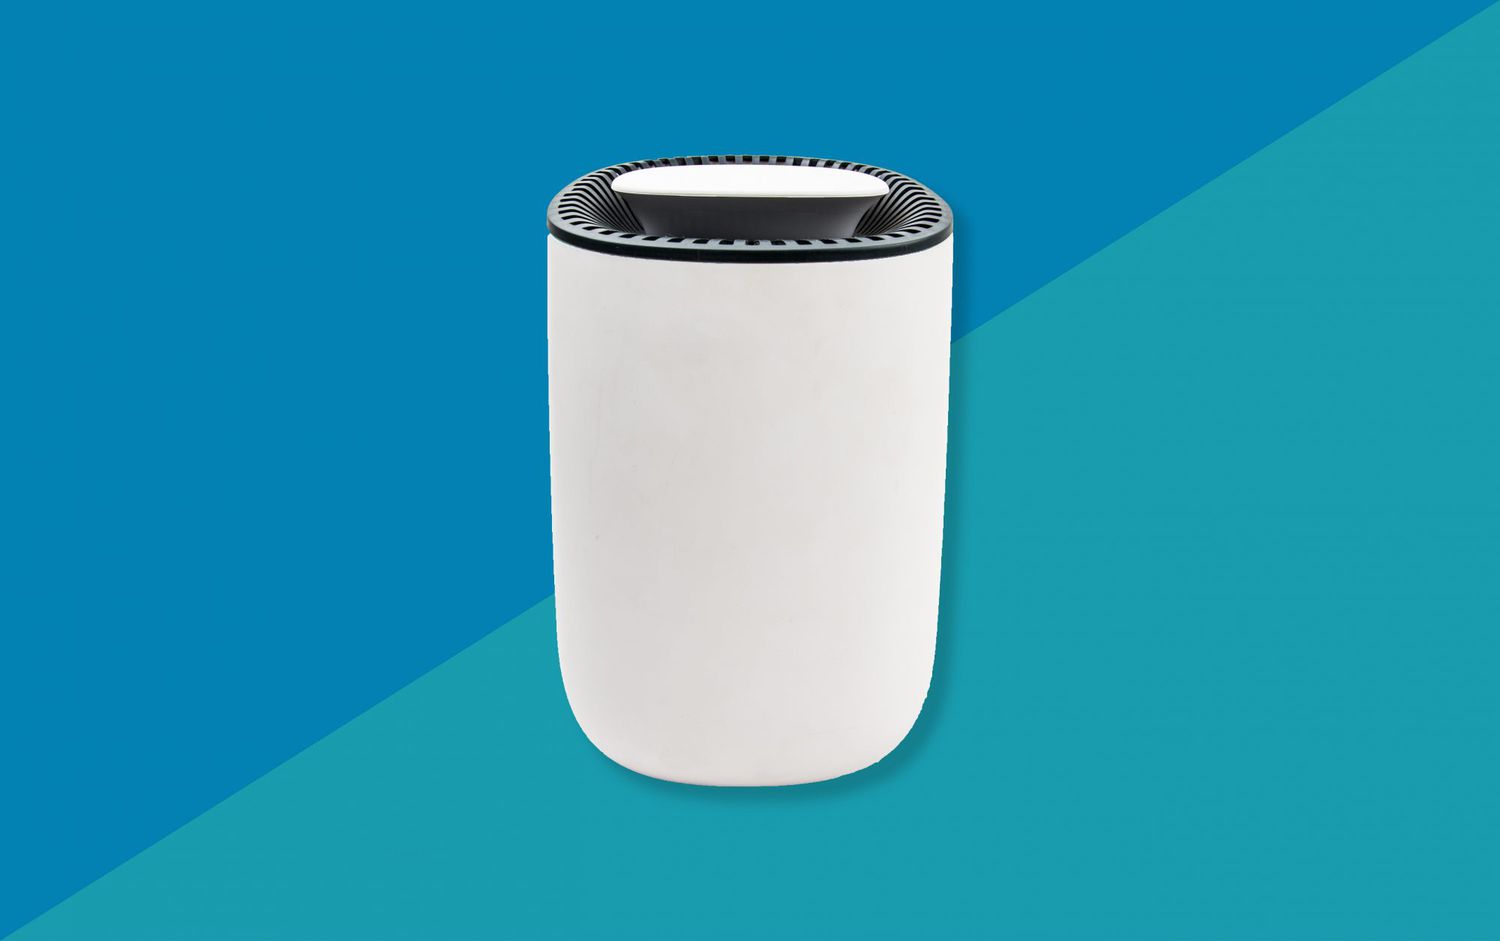 air purifier on patterned background